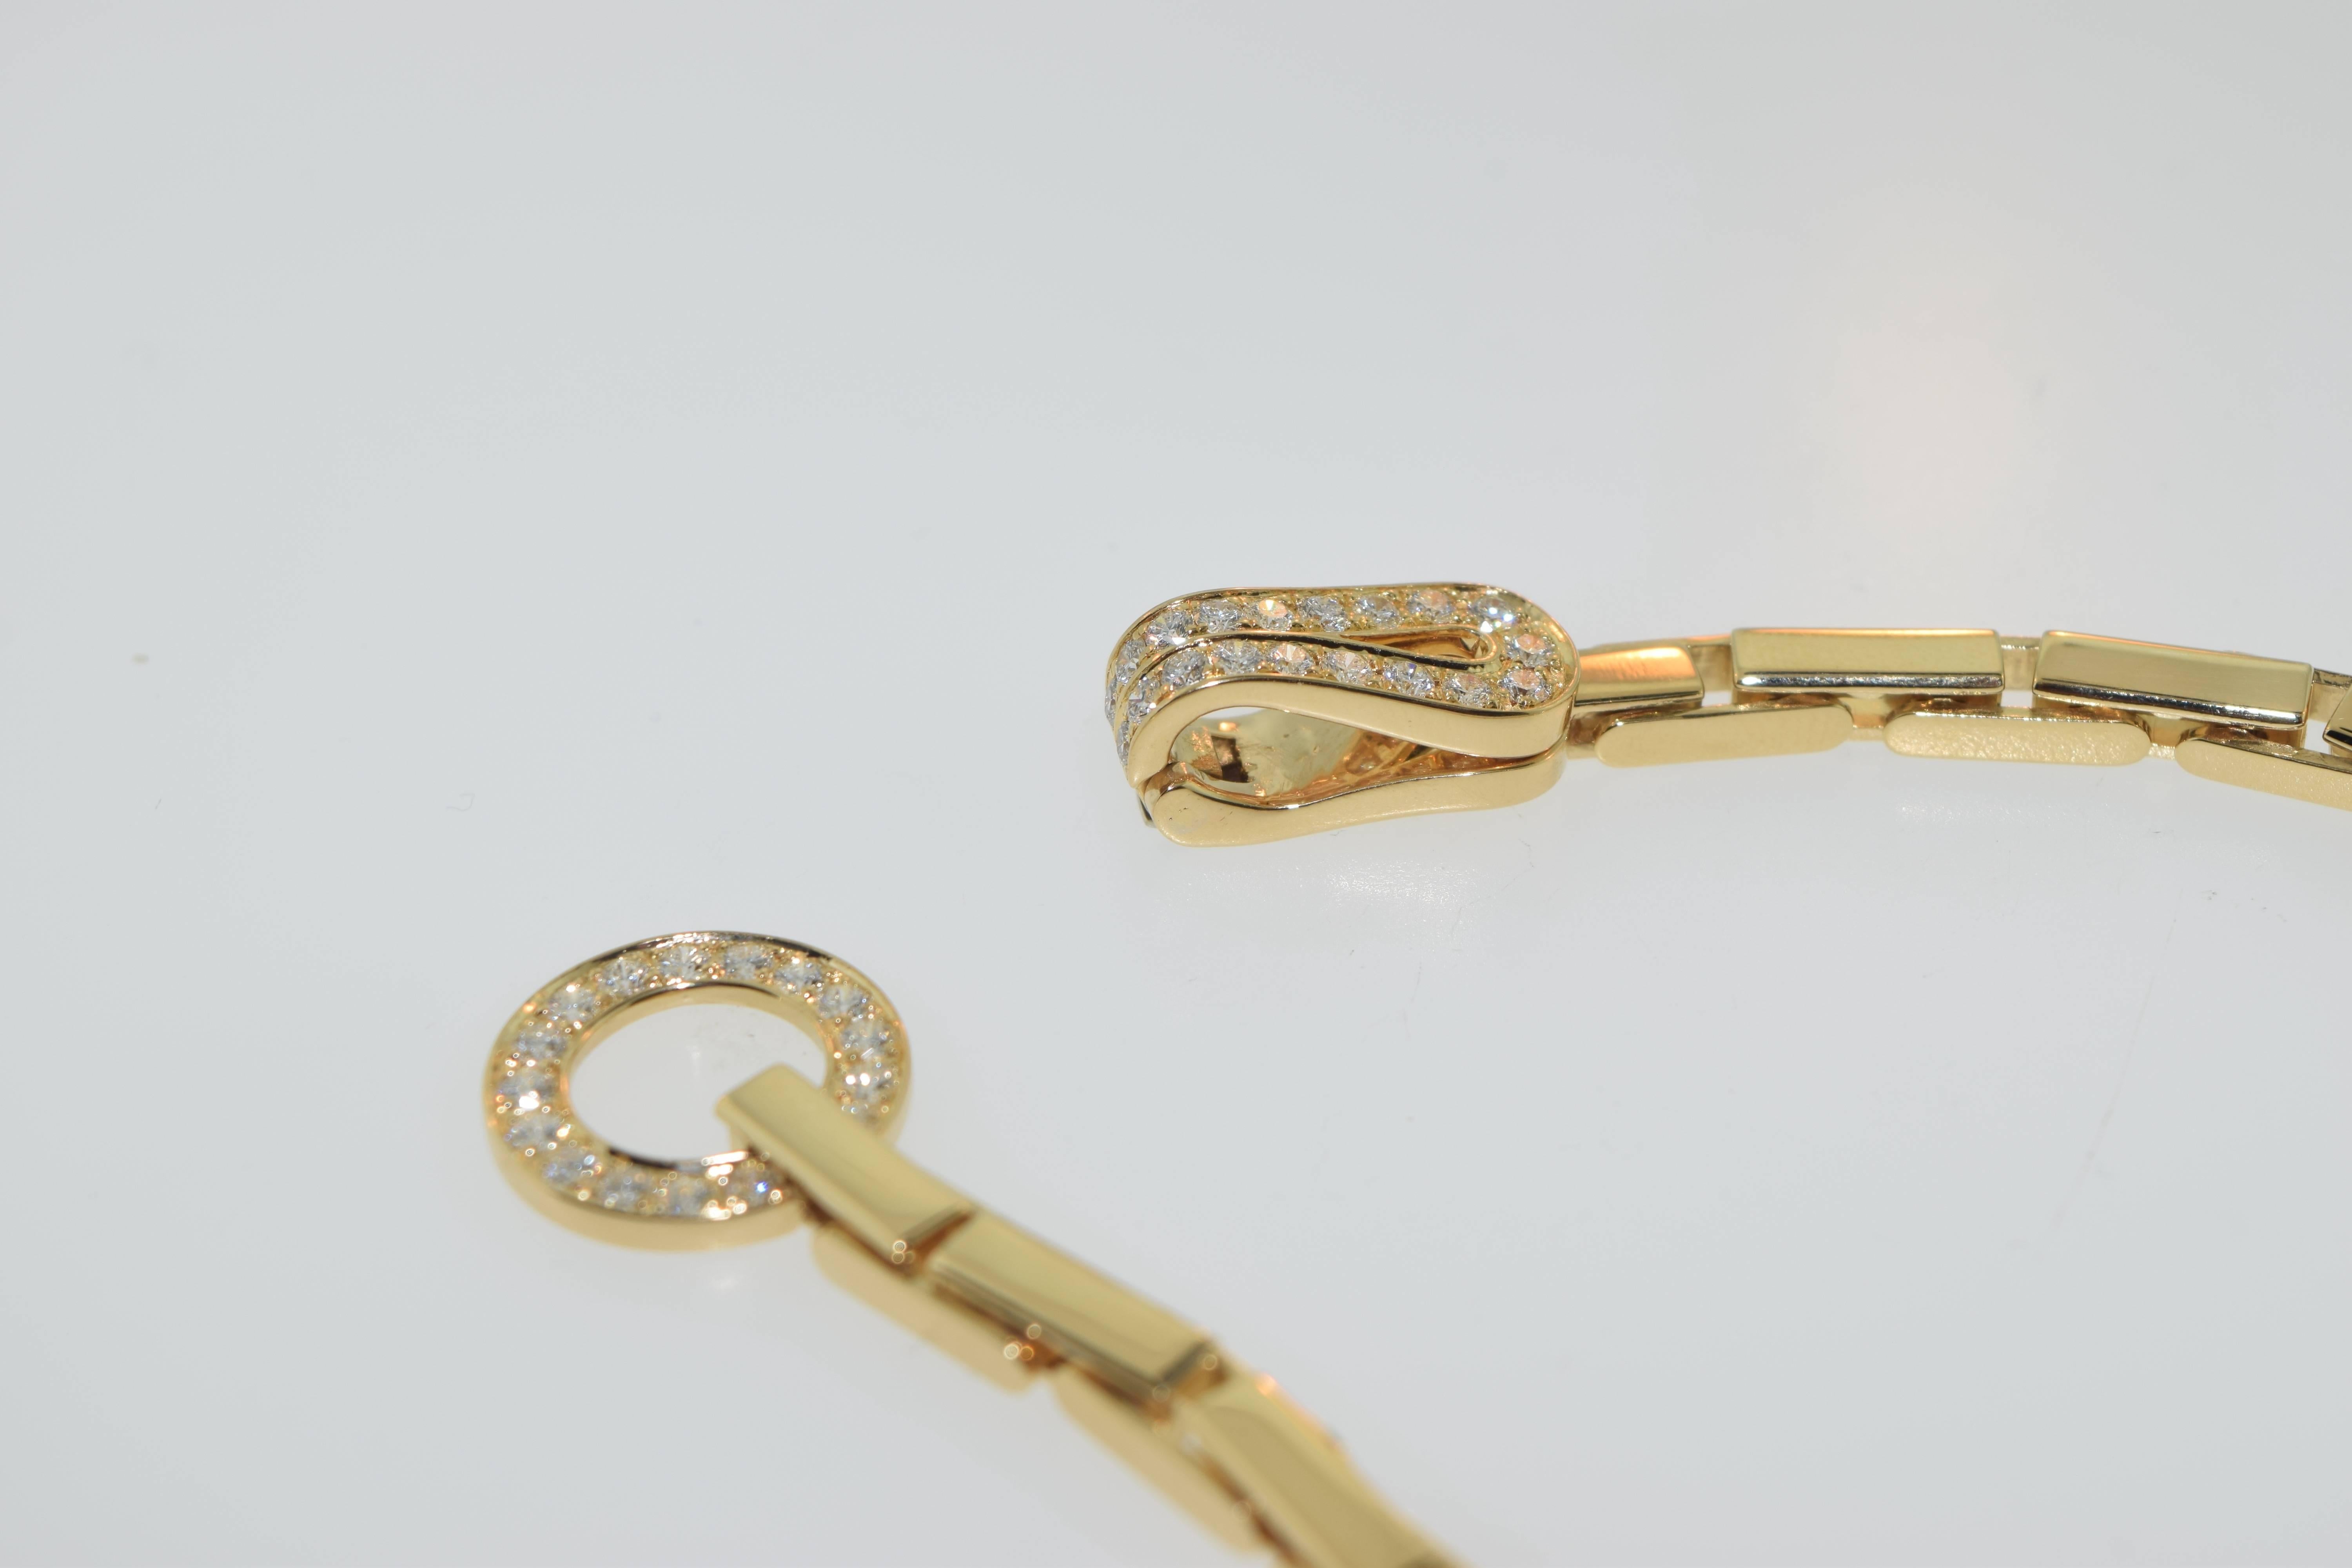 Cartier Agrafe Gold Clasp Bracelet

Prestigious and stylish, this 18K yellow gold bracelet by Cartier features interesting chain design making it harmonious and charming, while 1.35 carats of white diamonds set on the clasp add a note of luxury to